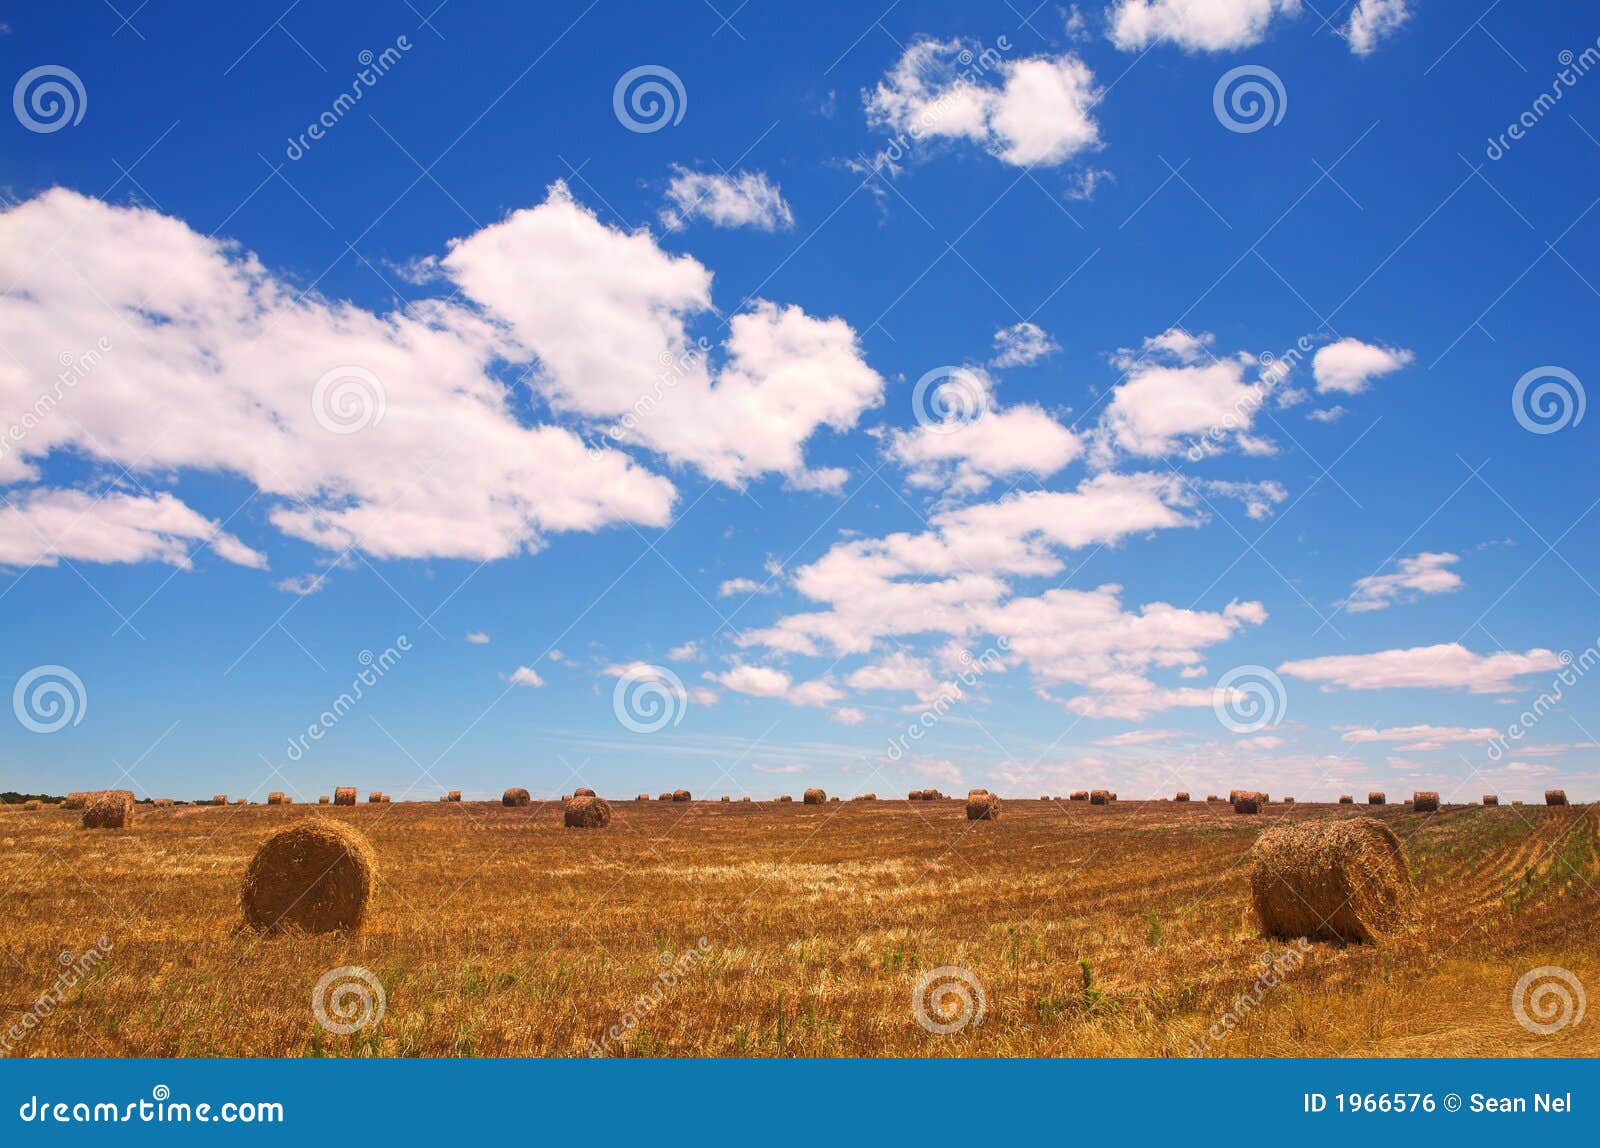 golden bales of hay on the lands